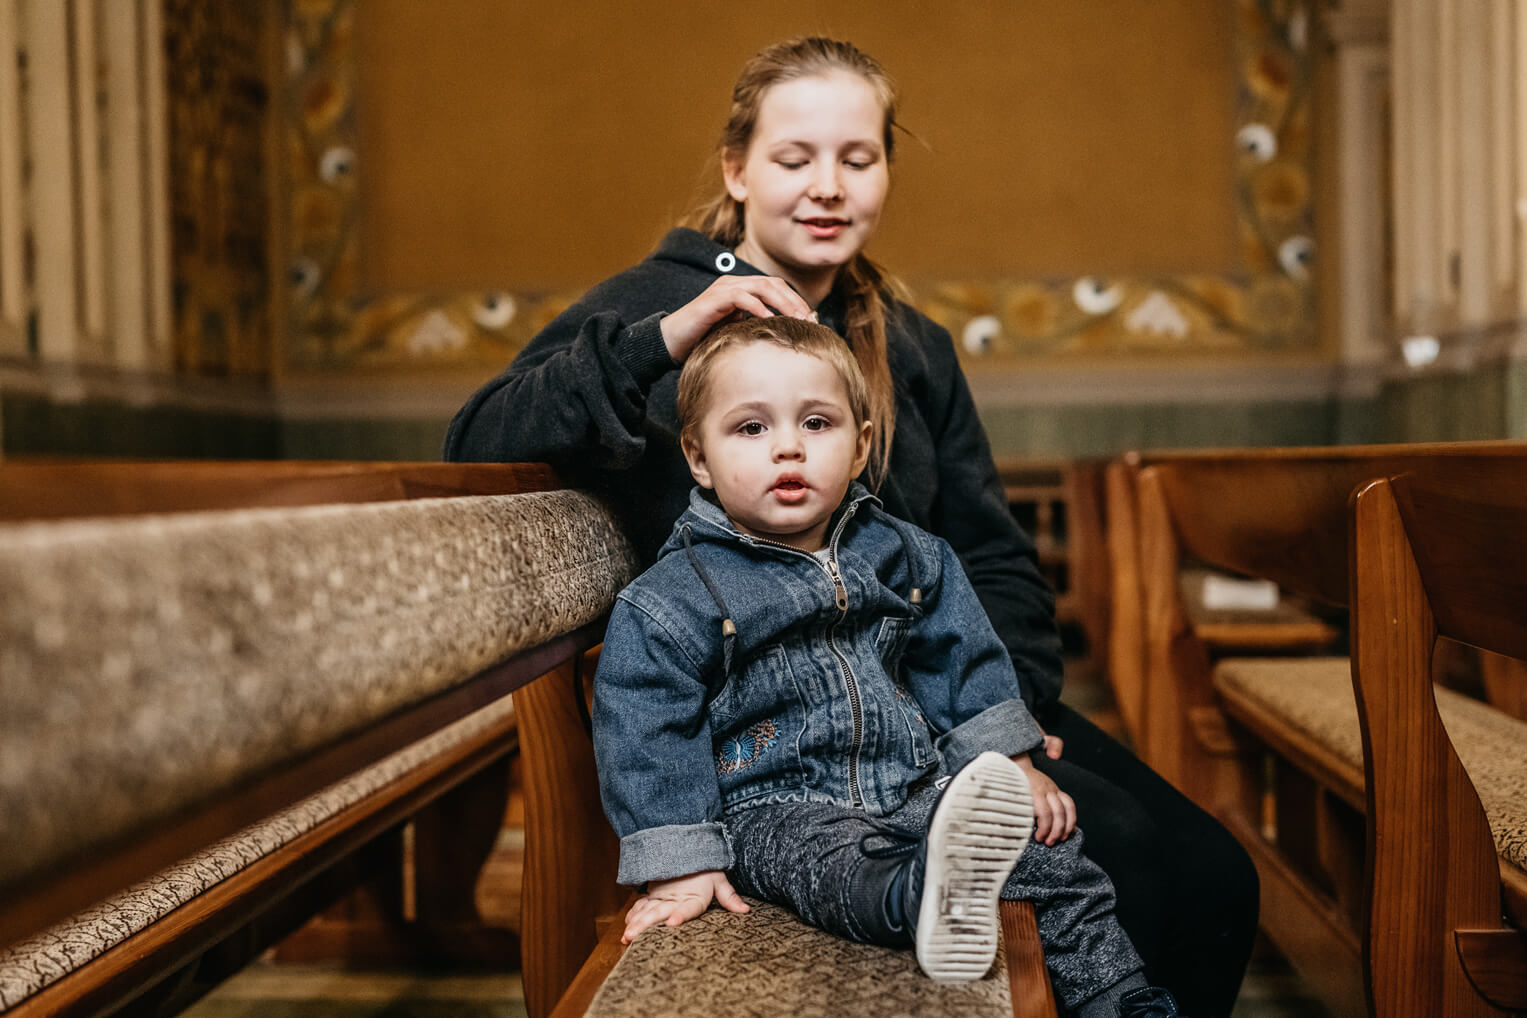 Resurrcetion Church in Lviv, Ukraine has been a sanctuary for internally displaced people fleeing violence in the East. Samaritan's Purse is supporting the efforts of the church by operating a mobile medical clinic there and in a church-sponsored orphanage.